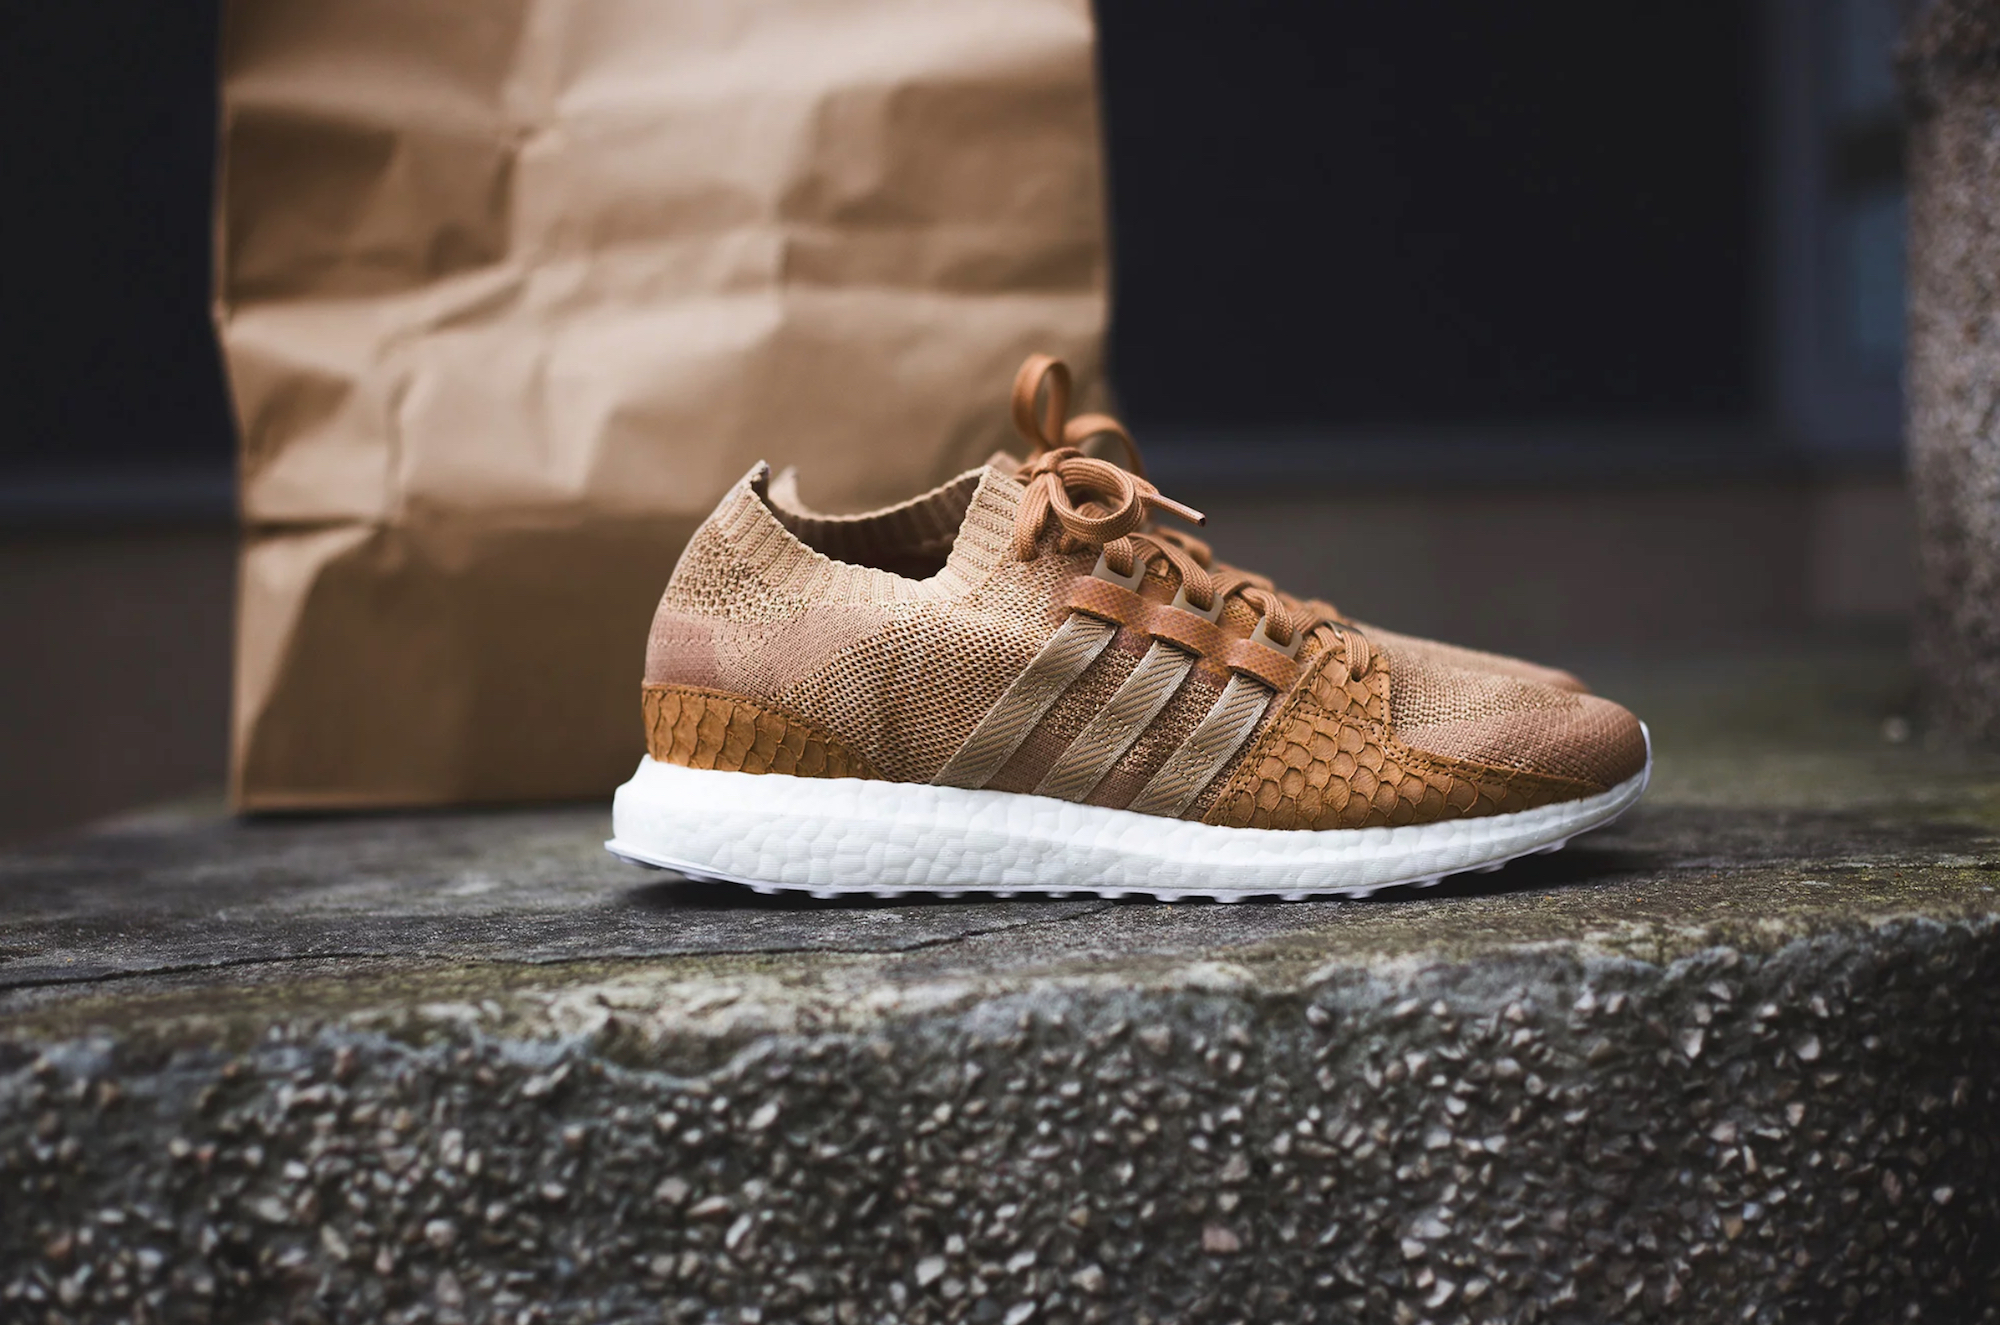 Here's a Better Look at the Pusha T x adidas Boost EQT 'Brown Paper Bag' -  WearTesters